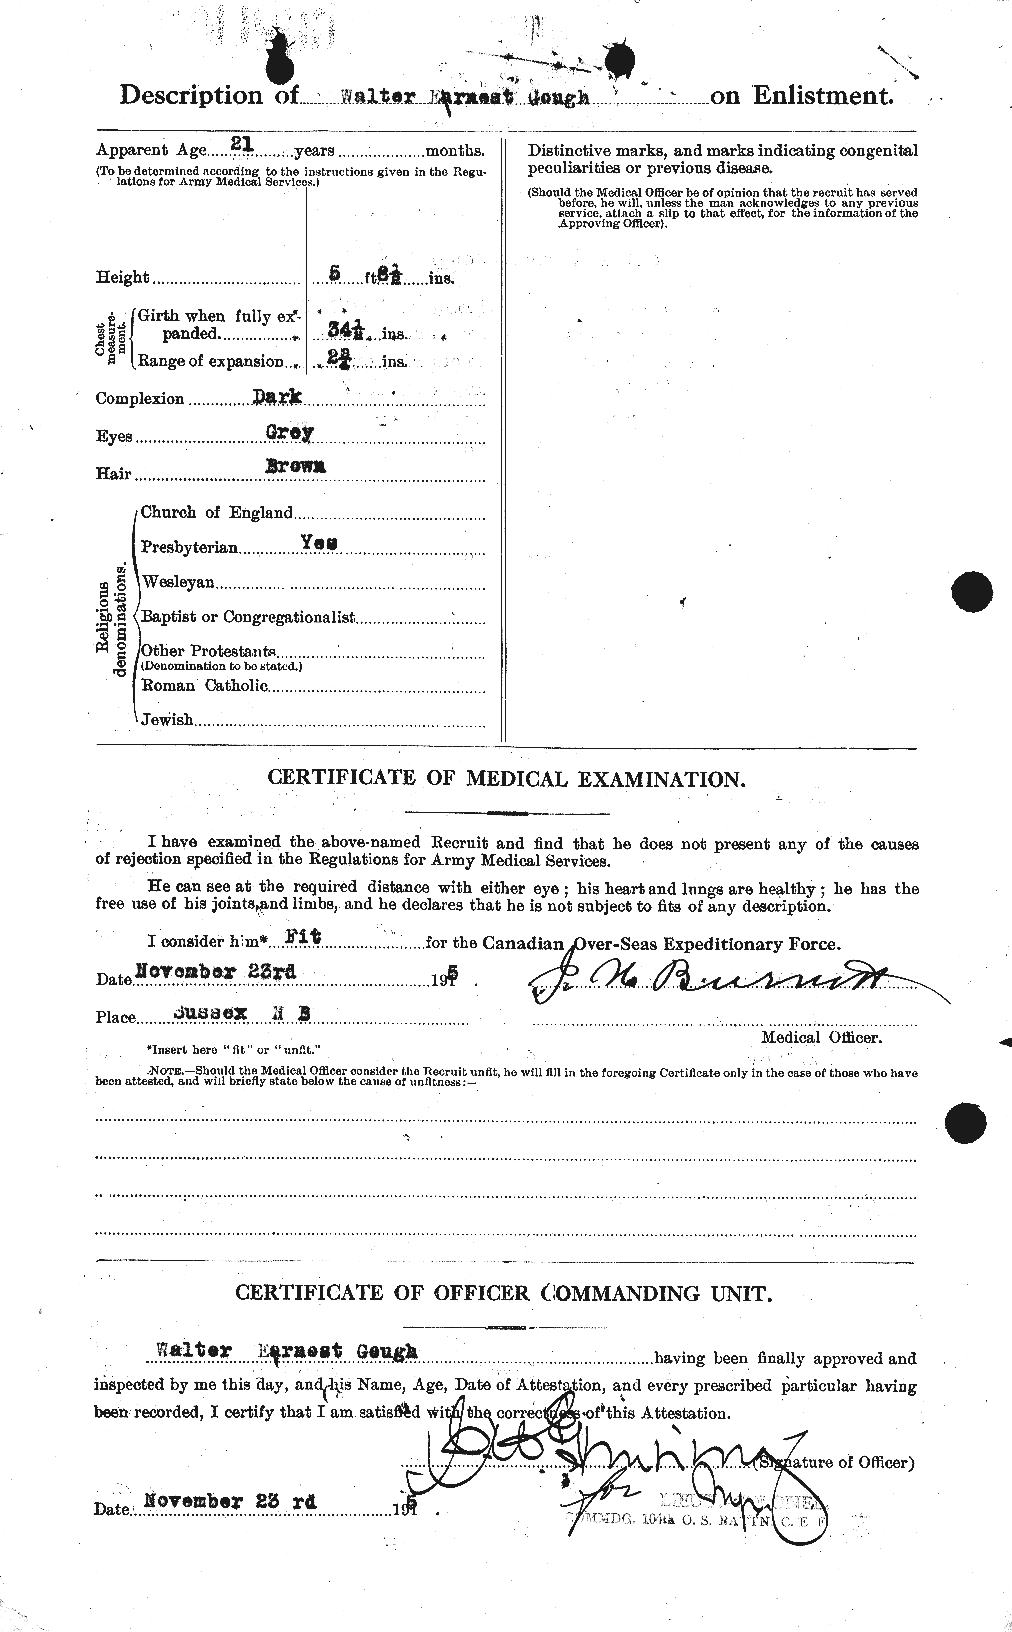 Personnel Records of the First World War - CEF 356462b